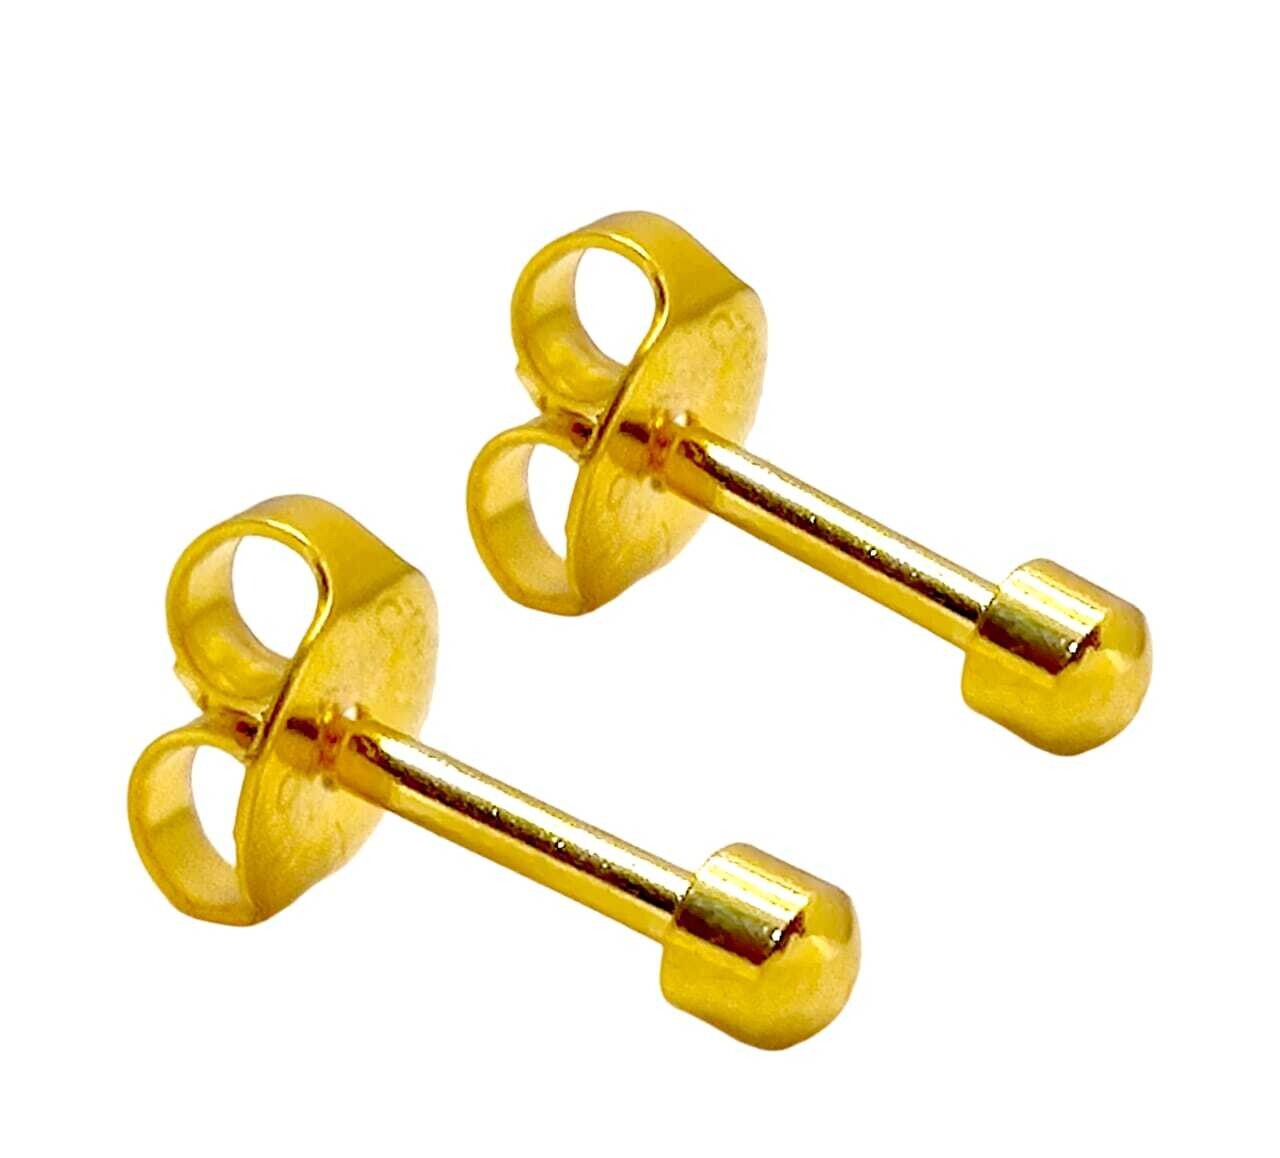 Studex Gold Plated Ear Piercing Studs Earring